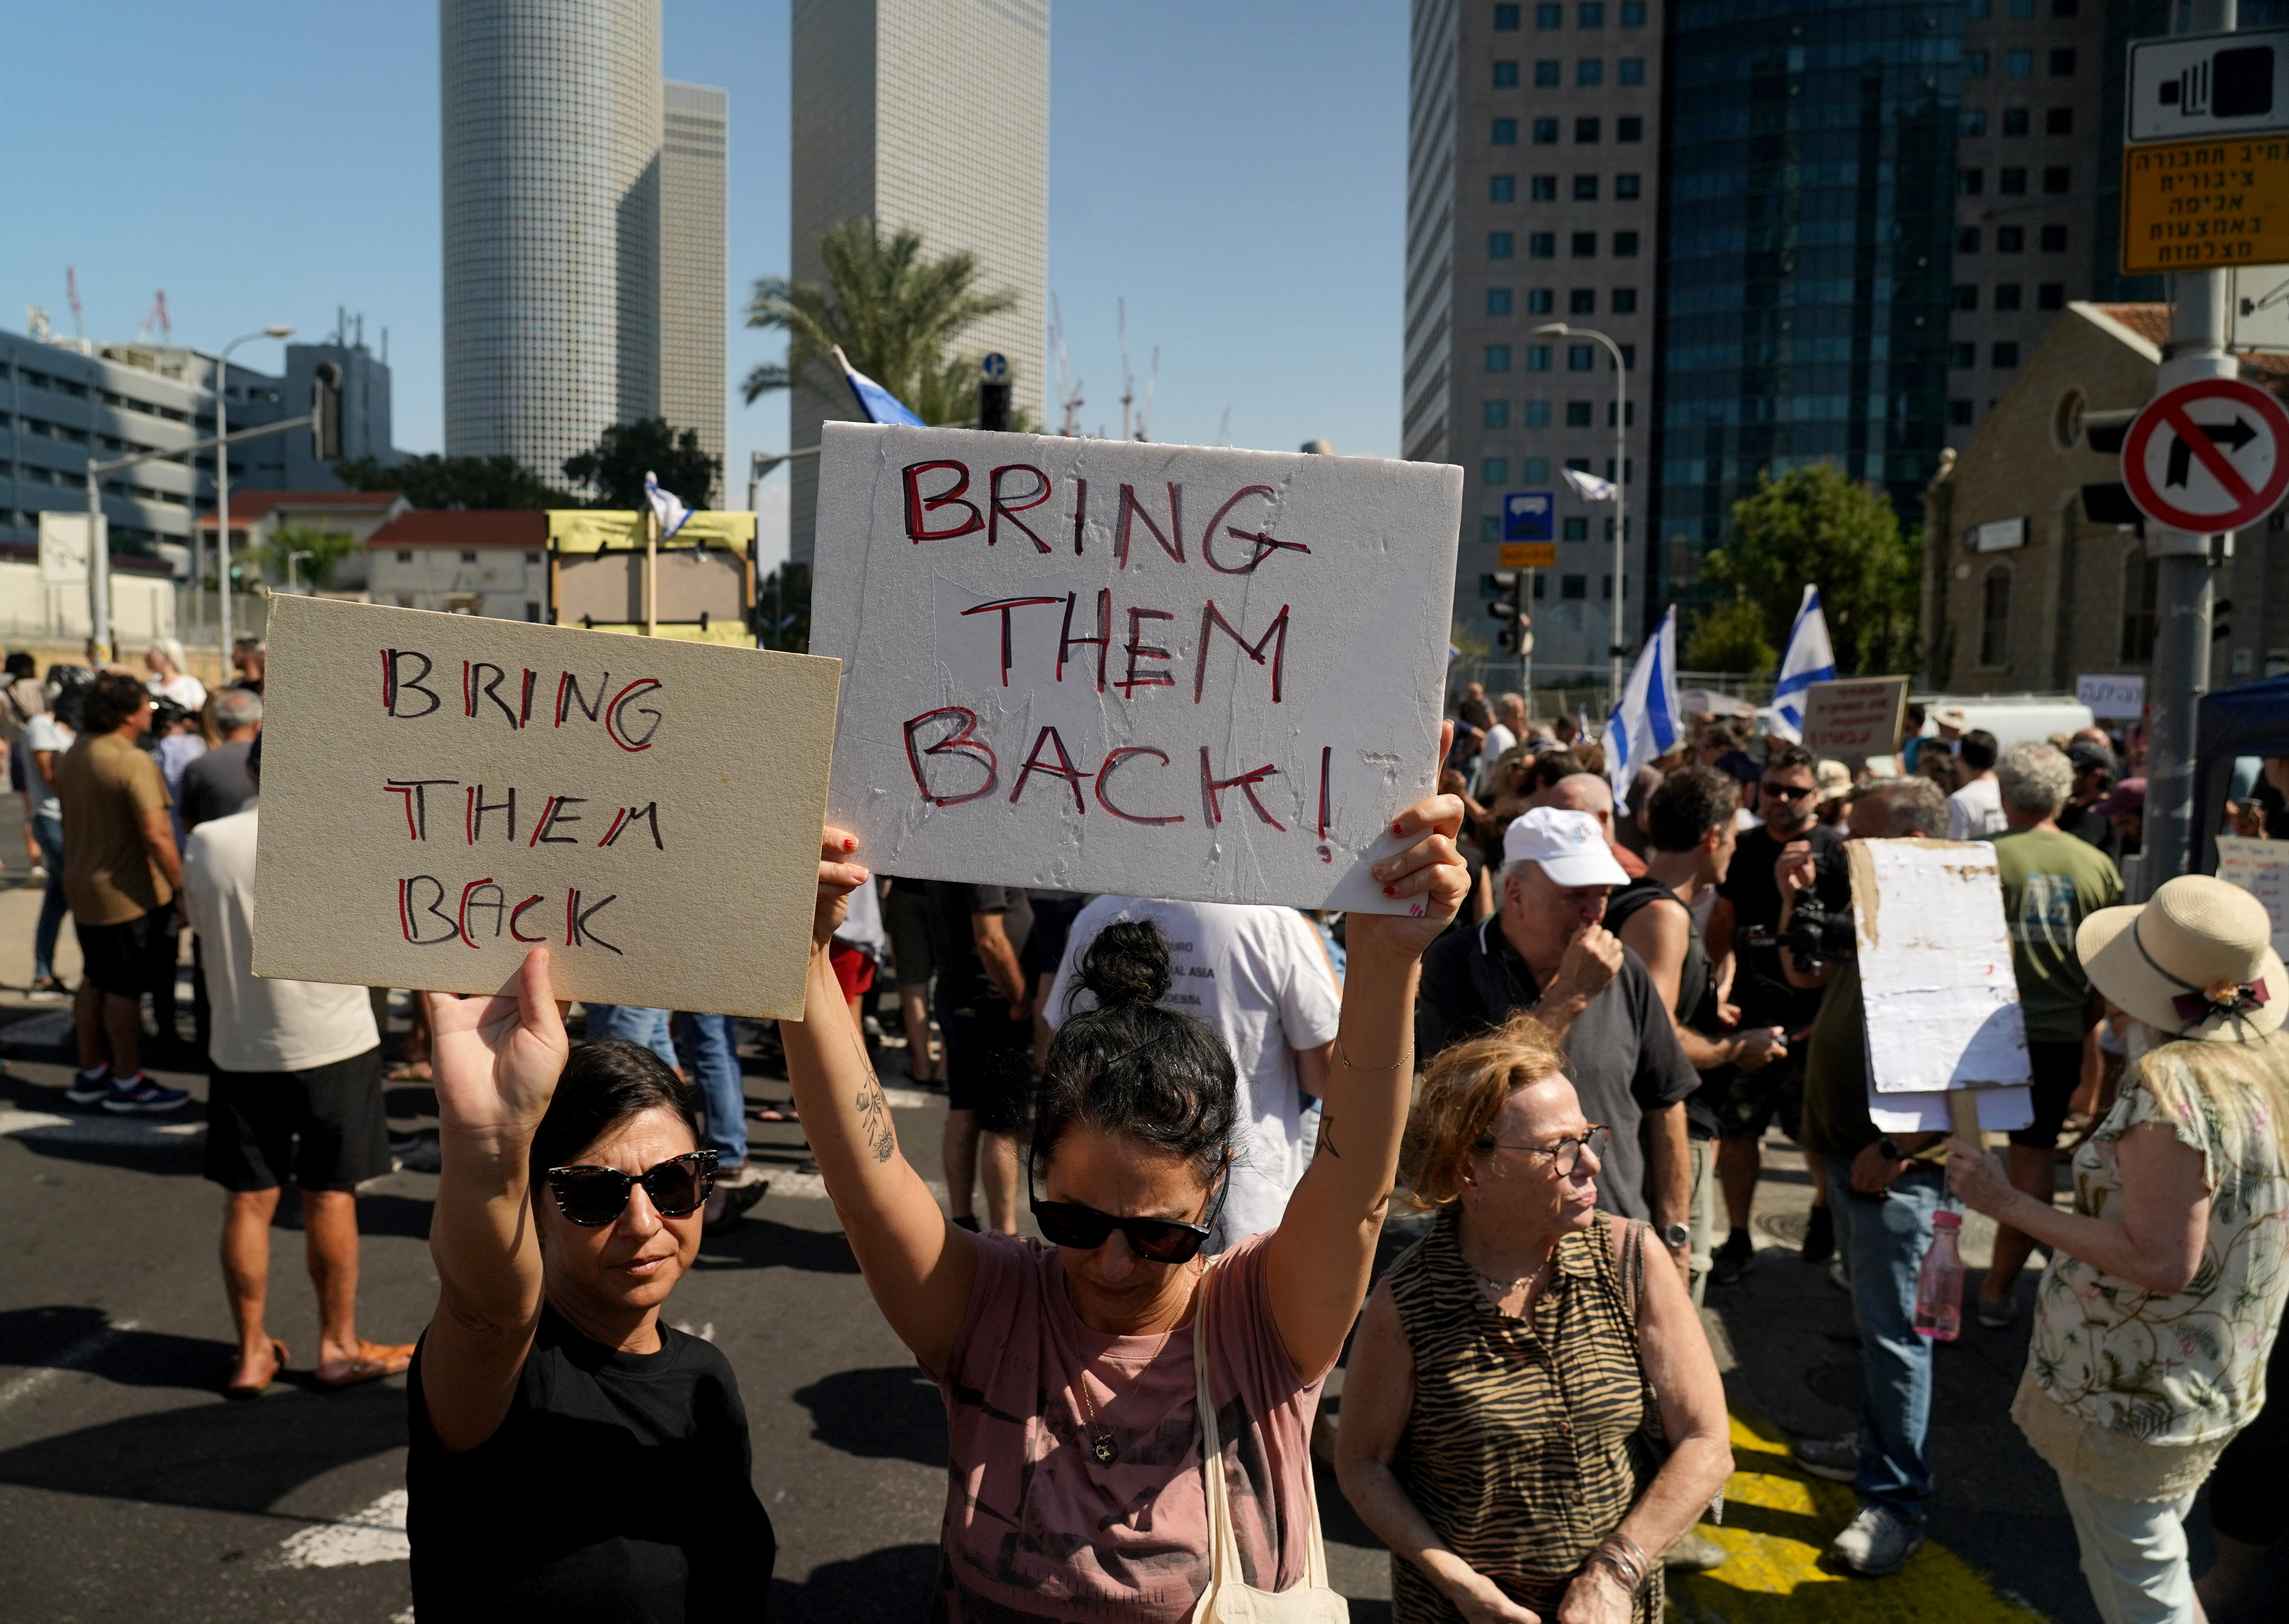 Israelis attend a demonstration, calling for the return of loved ones who were taken as hostages following a deadly infiltration by Hamas gunmen from the Gaza Strip, in Tel Aviv